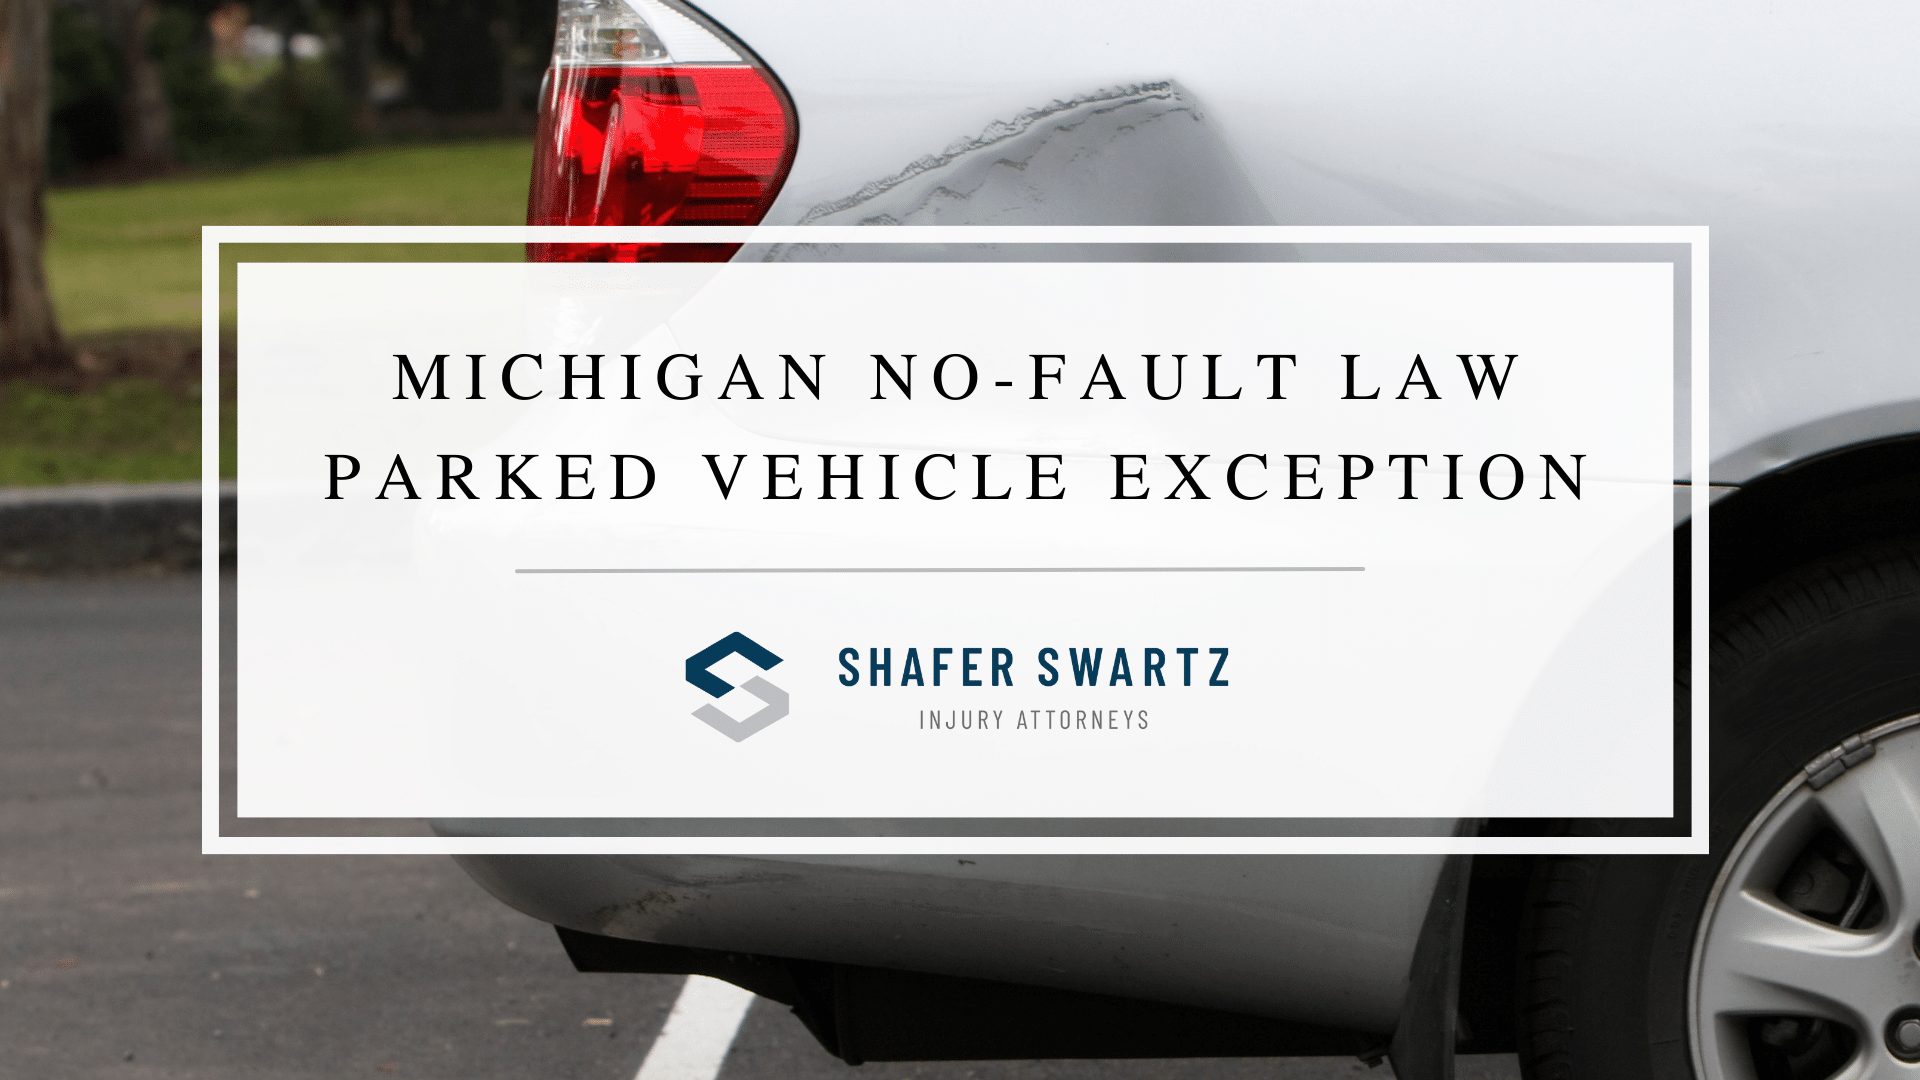 Featured image of the Michigan no-fault law parked vehicle exception